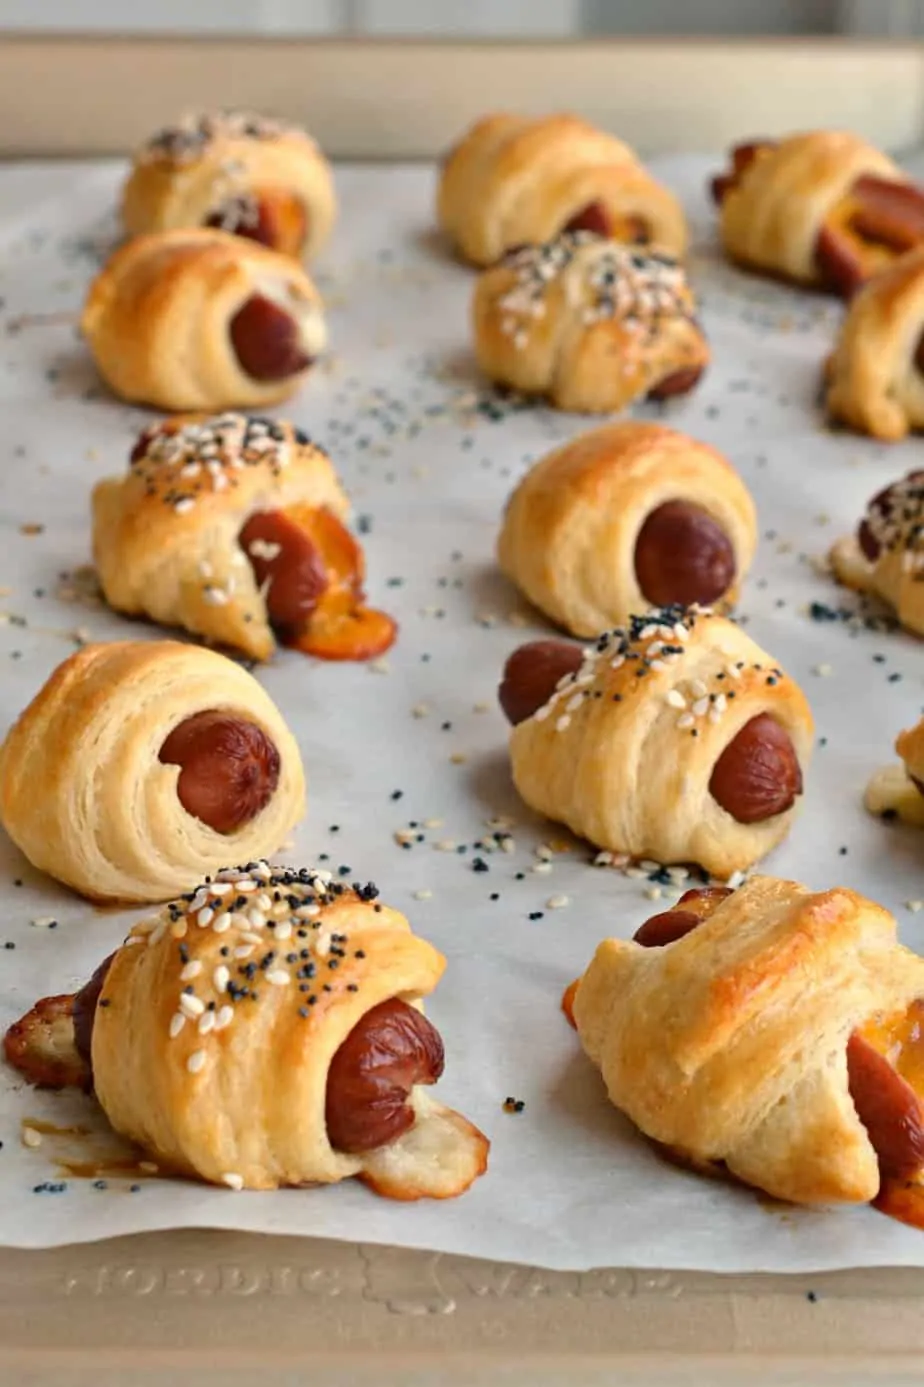 Mini Pigs in a blanket are one of the easiest comfort foods to make using a variety of cheese and refrigerated crescent rolls. 